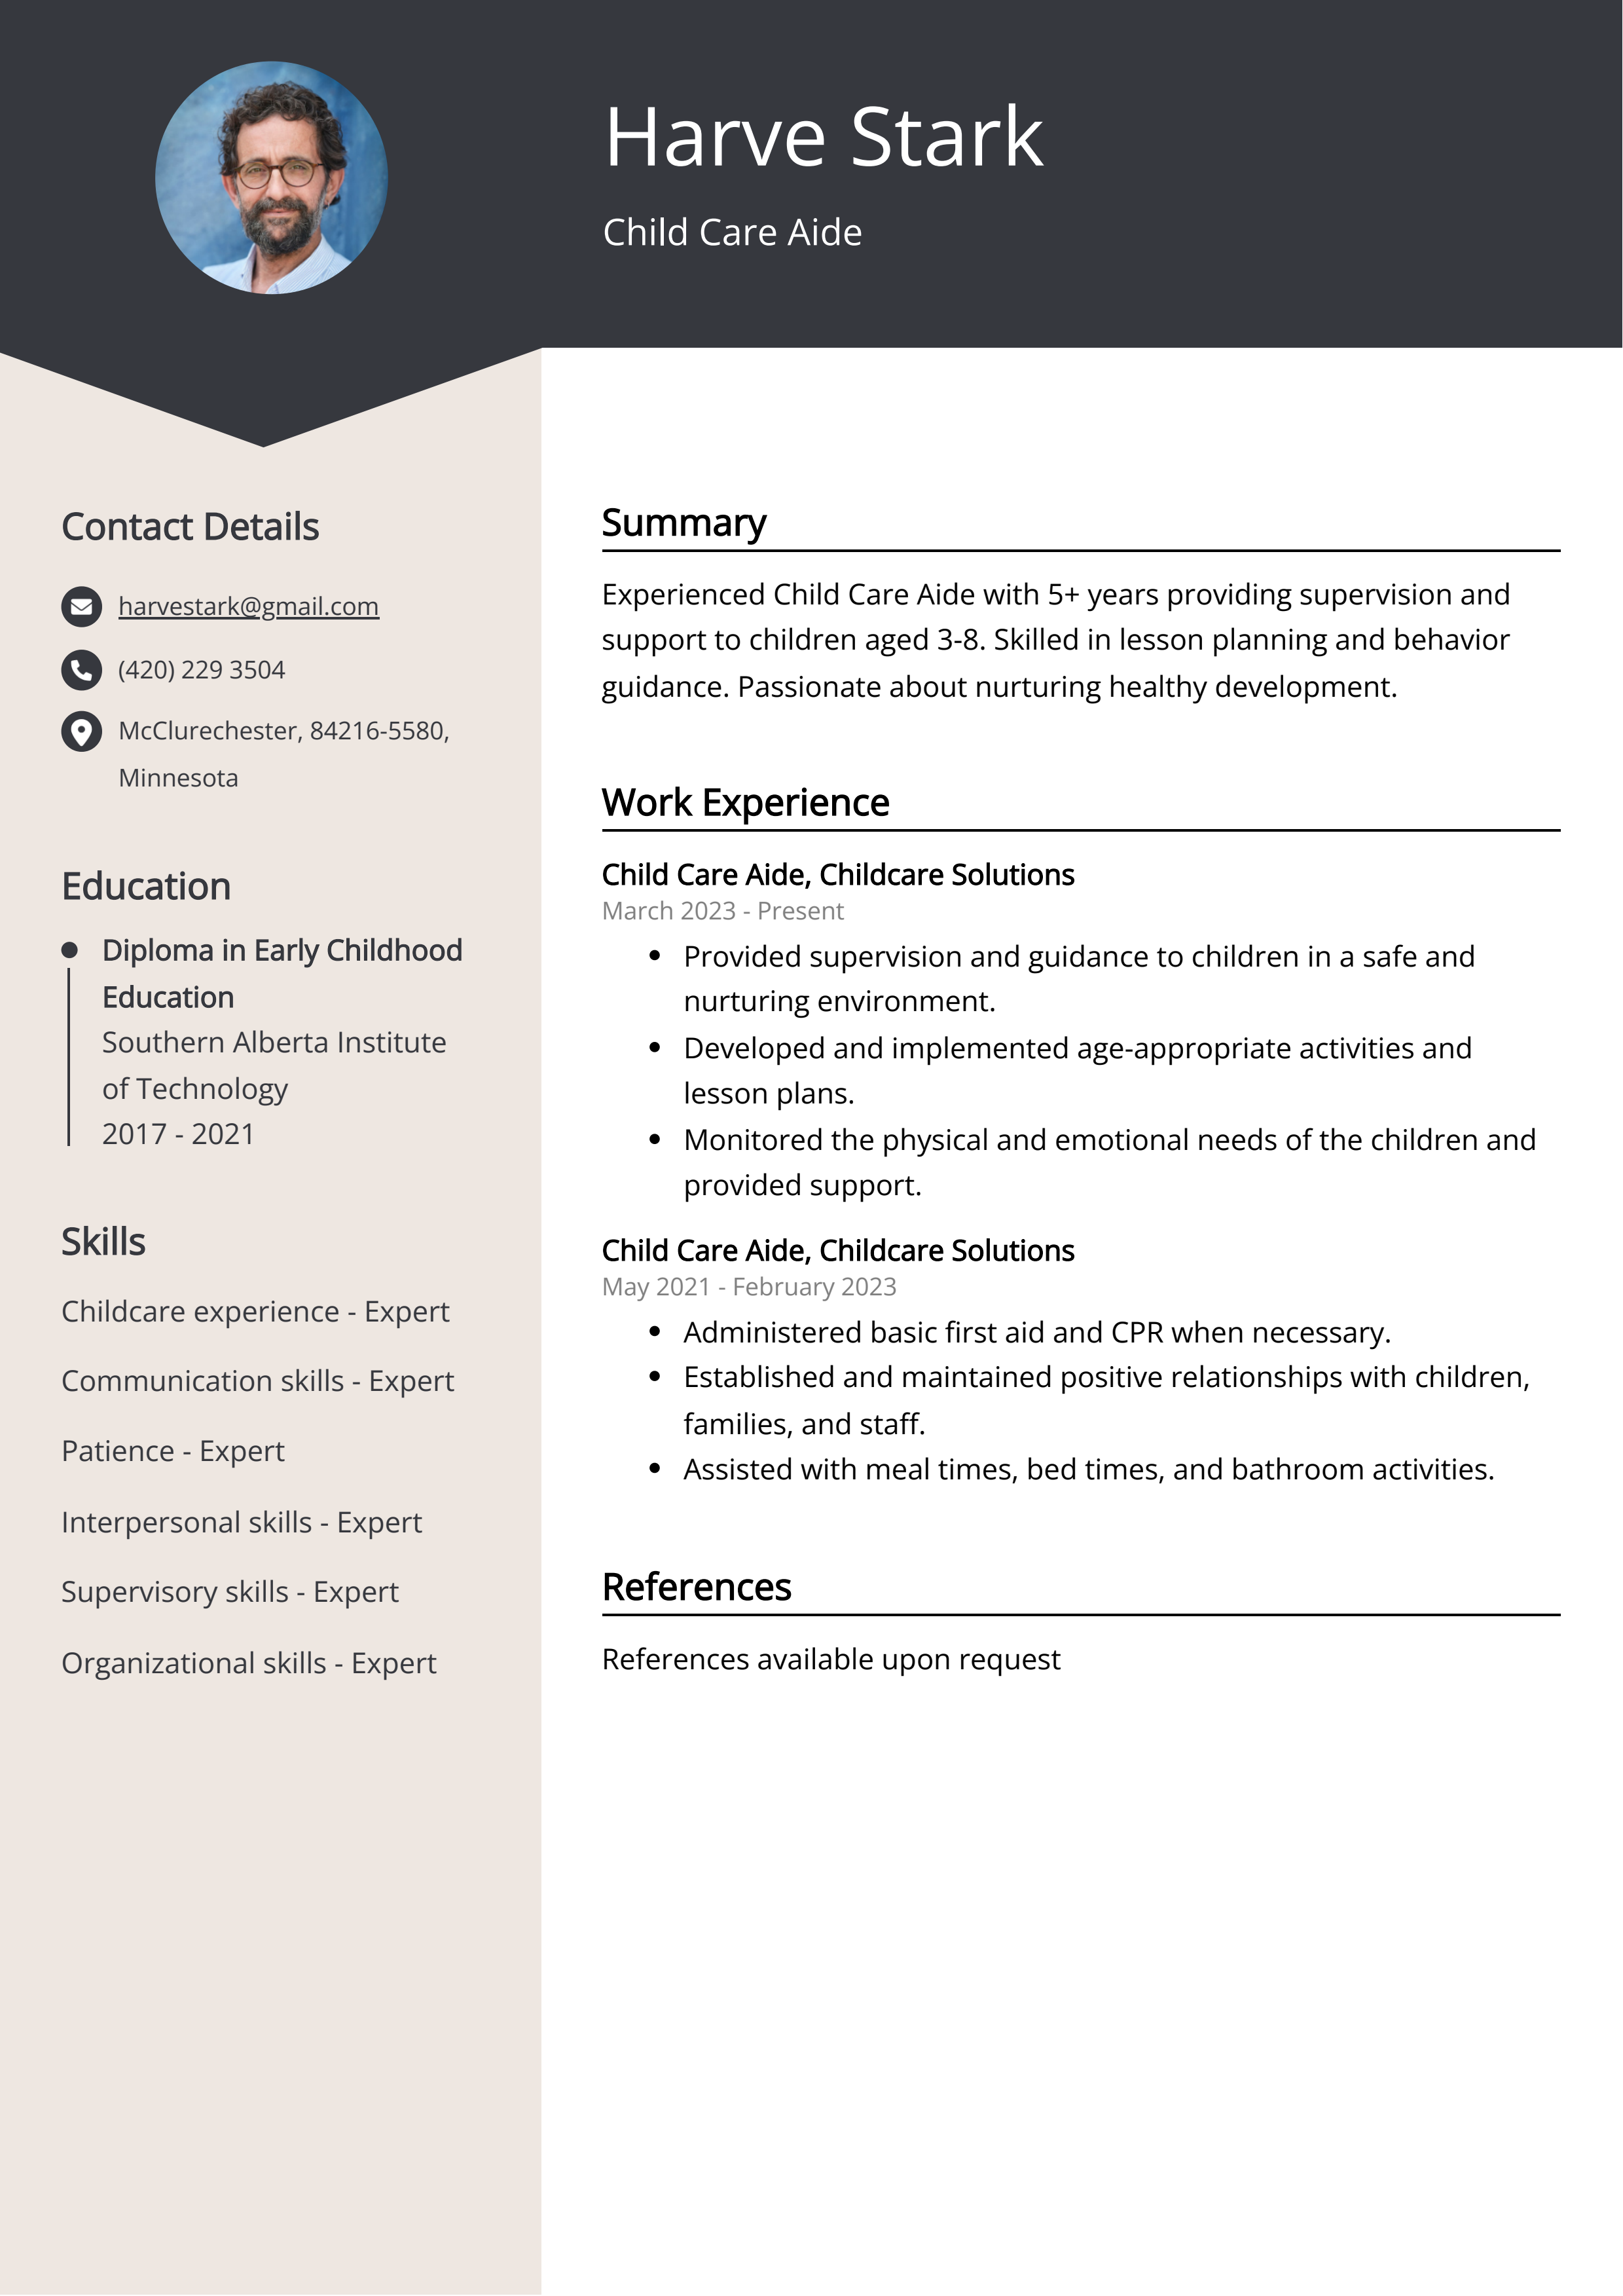 Child Care Aide CV Example